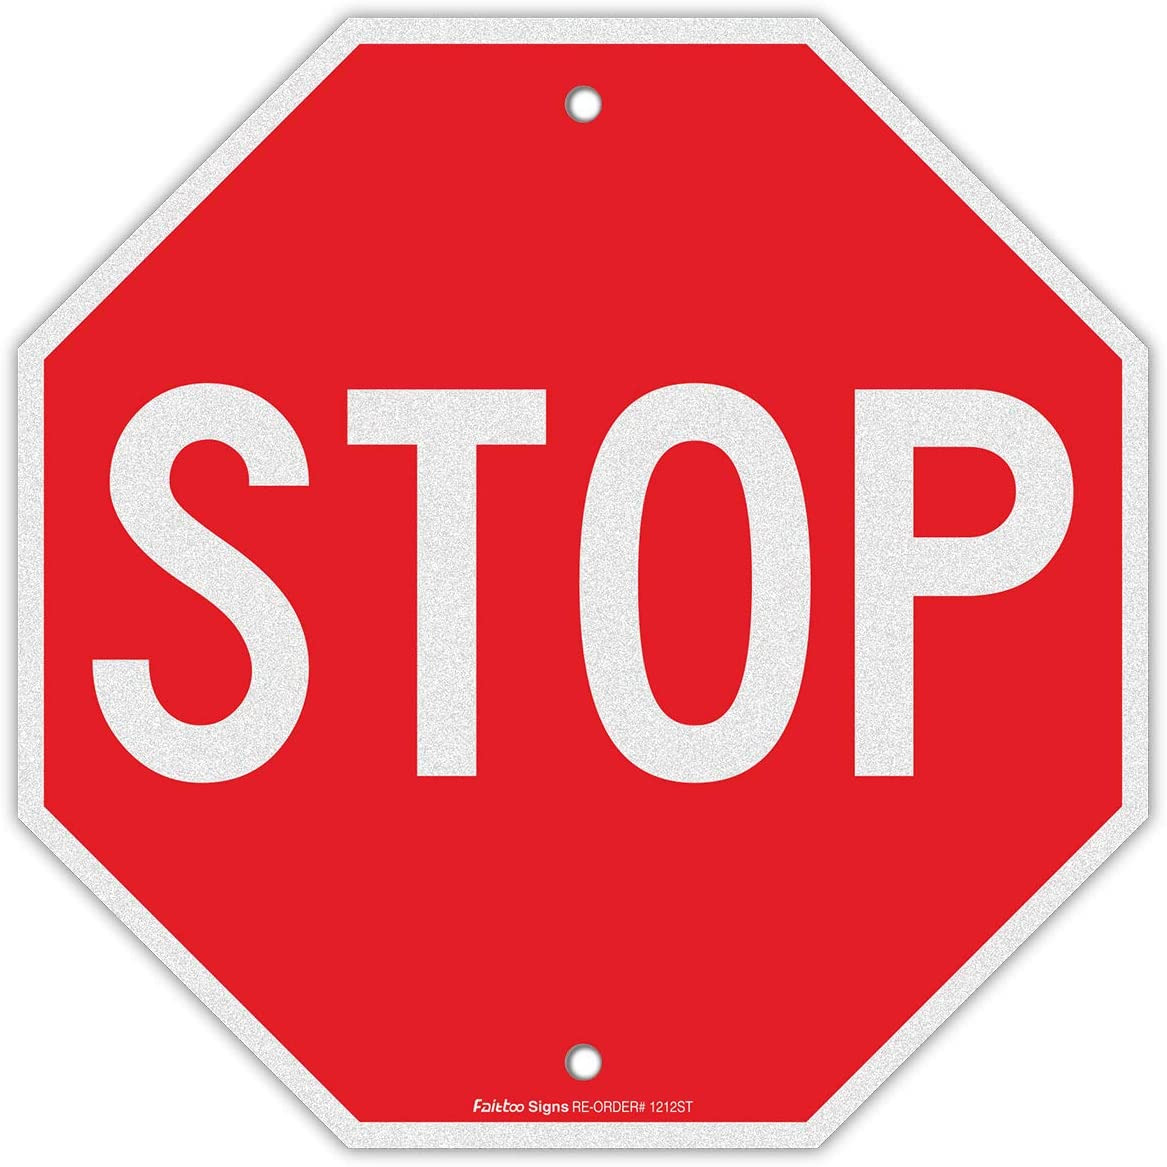 Stop Sign Street Slow Warning Reflective Signs 12 X 12 Inches Octagon 040 Rust